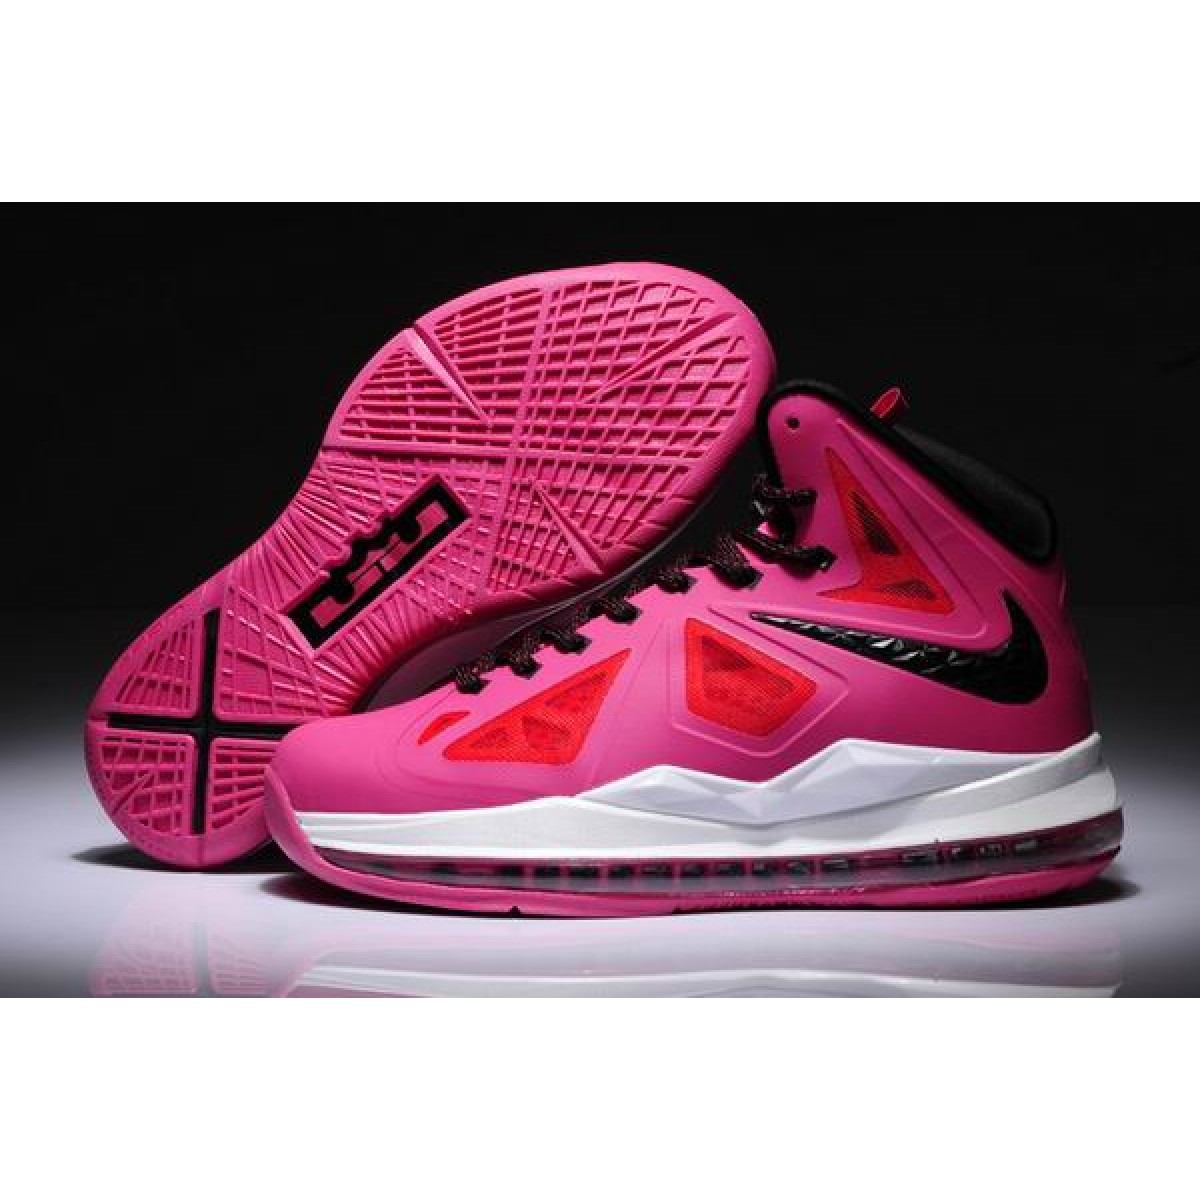 lebron james shoes pink and white